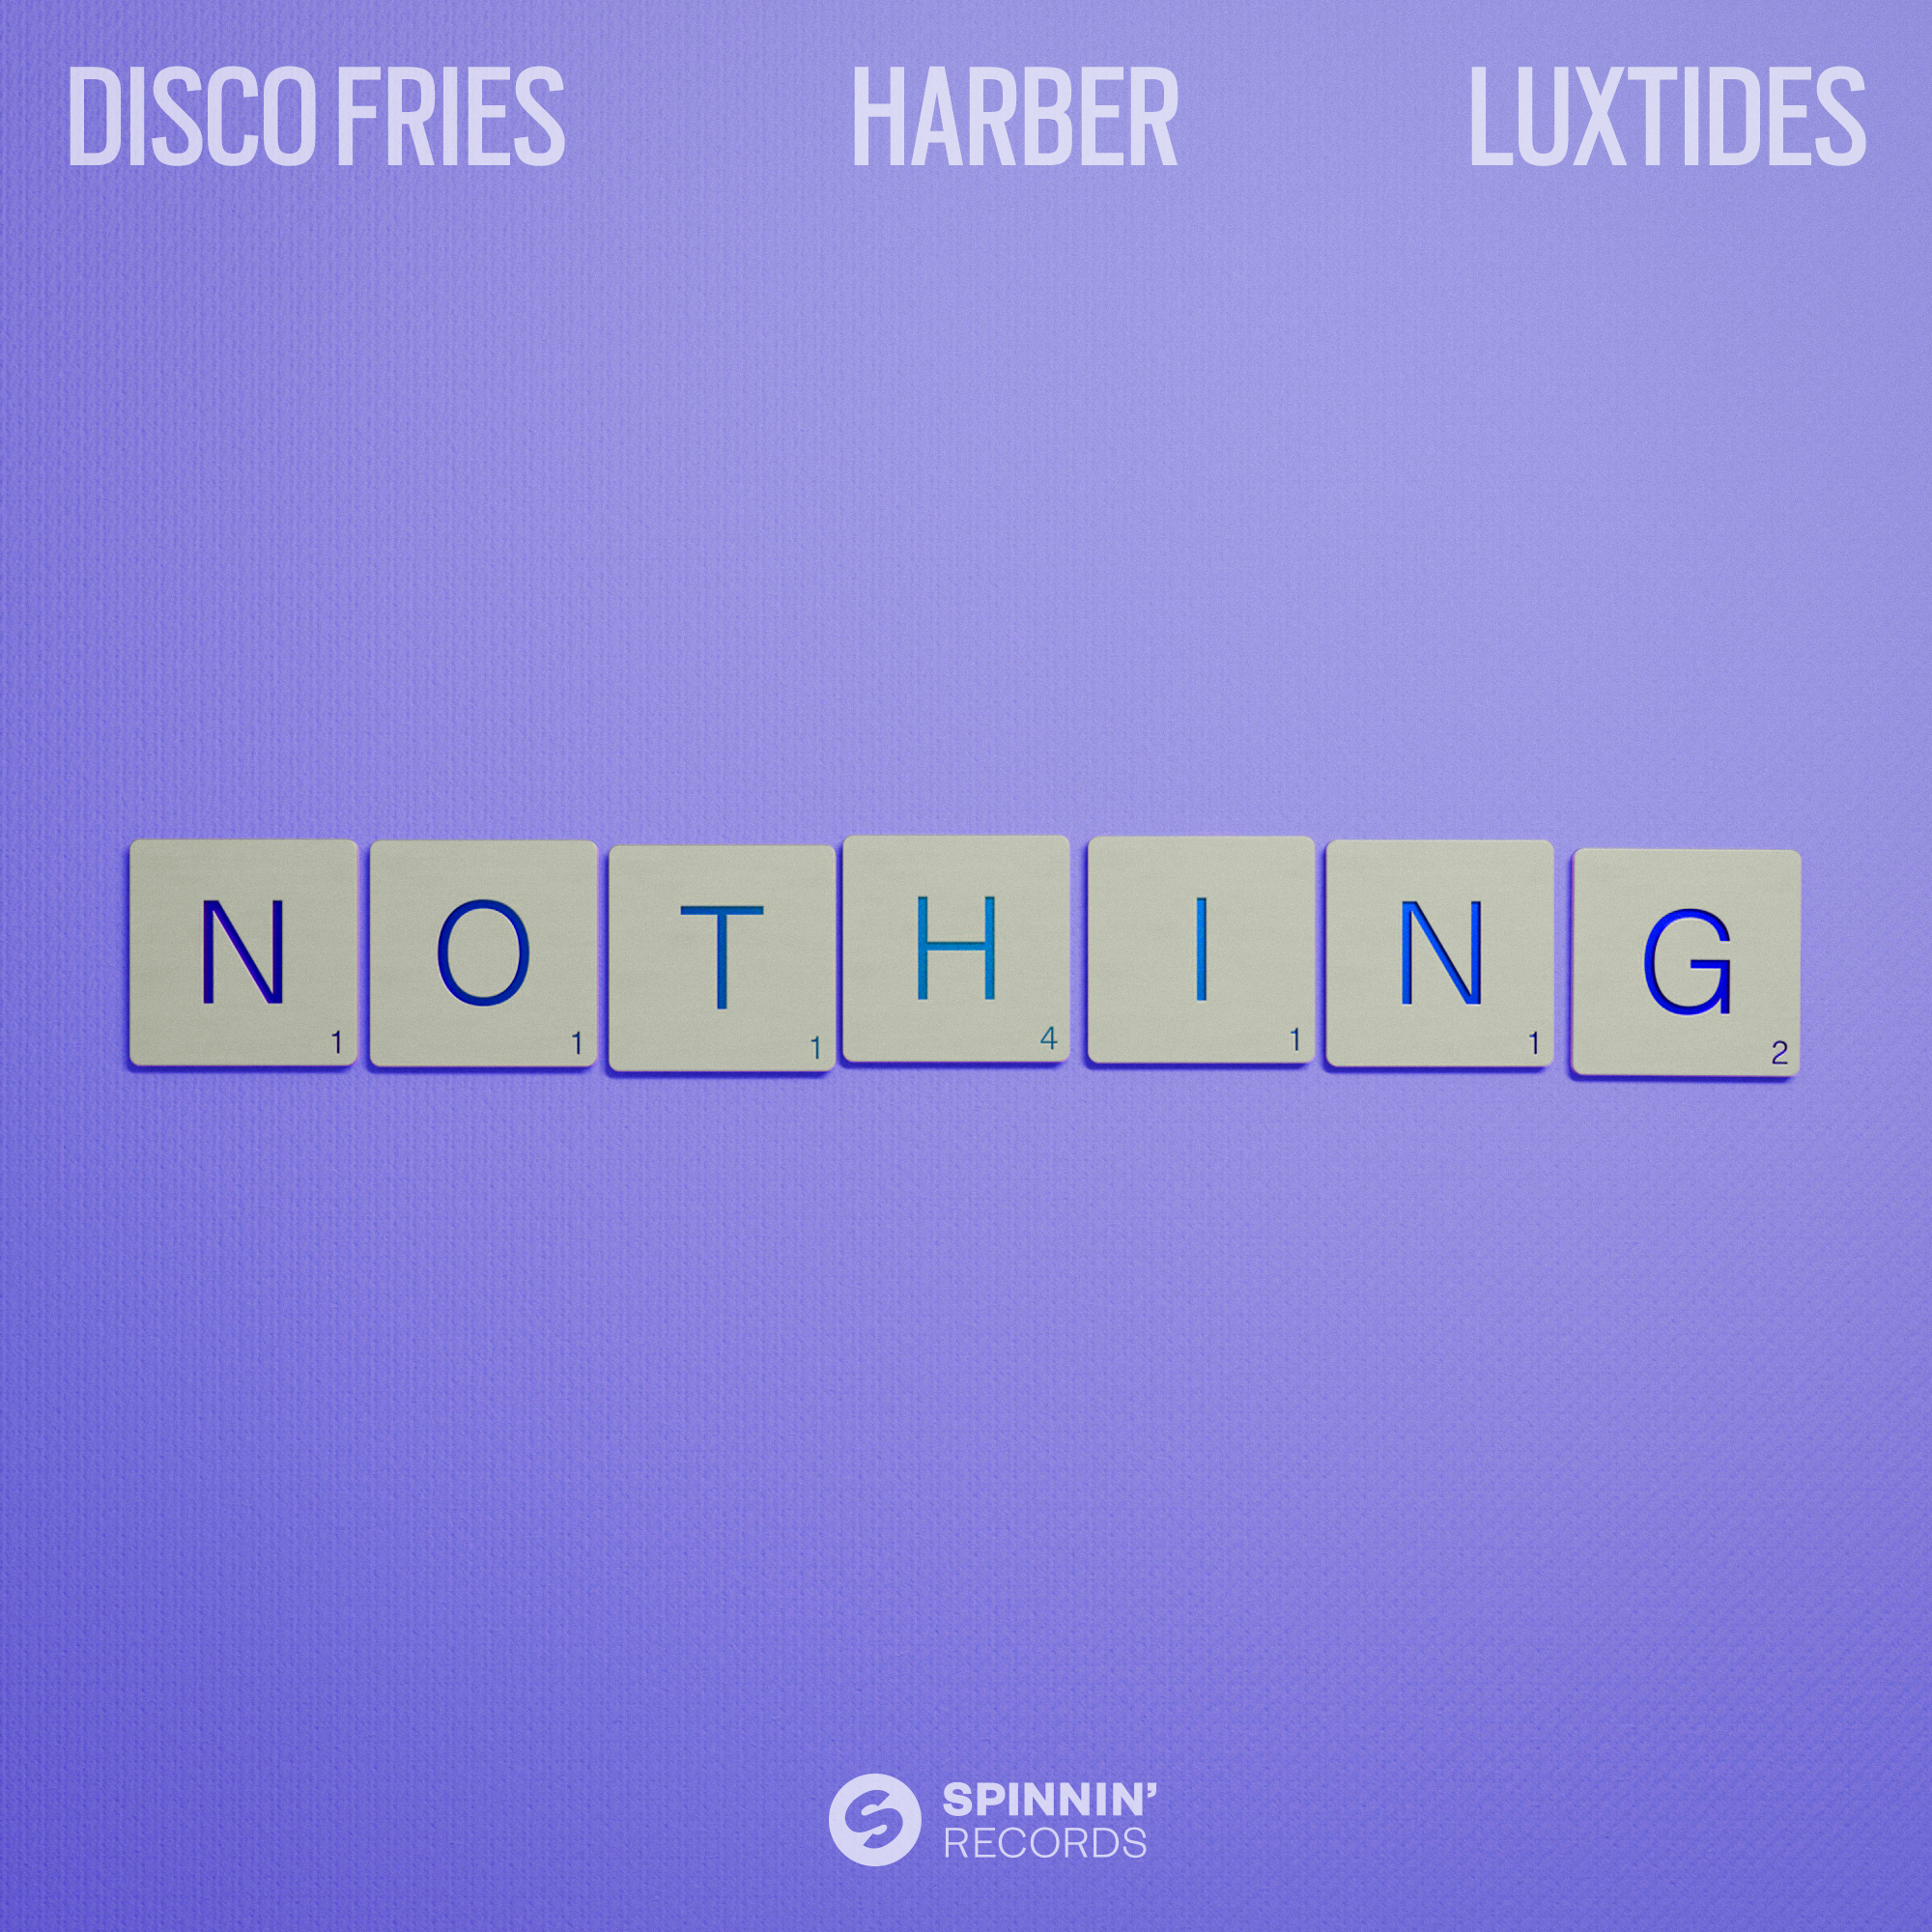 Disco Fries, HARBER, & Luxtides Collides Talents On Spinnin’ Records Release ‘Nothing’